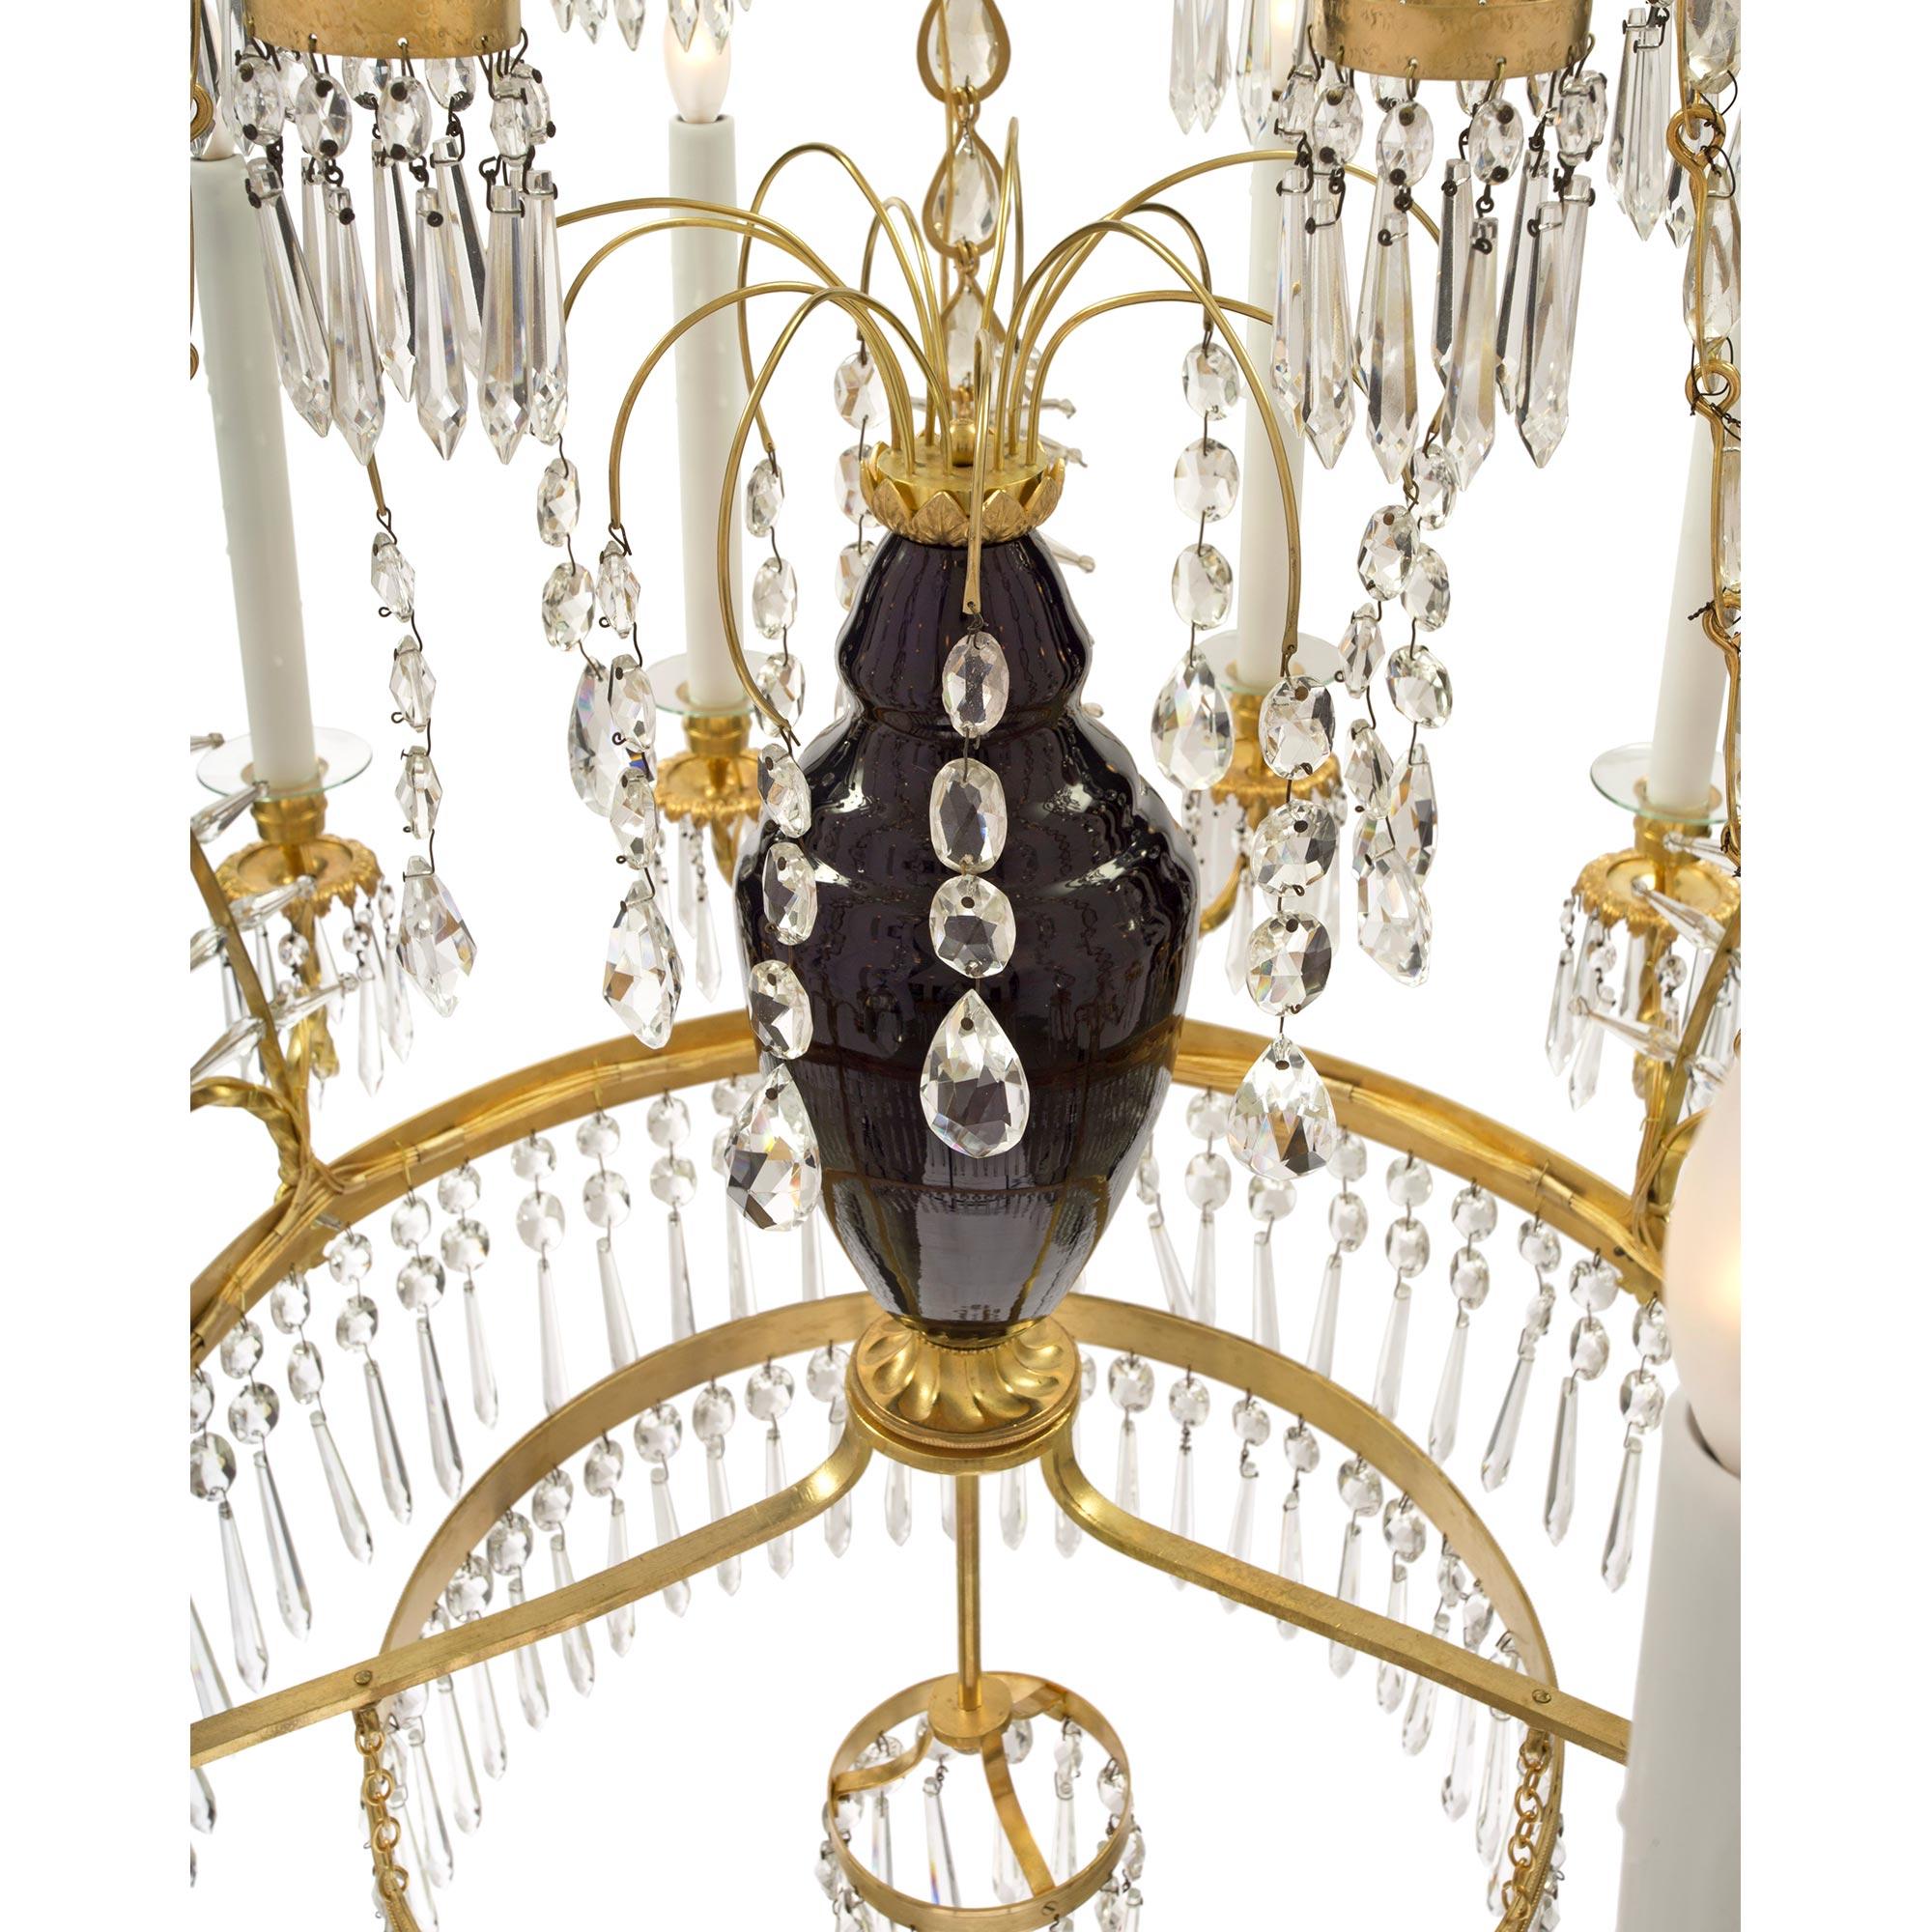 Russian 19th Century Neoclassical Style Glass, Crystal and Ormolu Chandelier For Sale 5